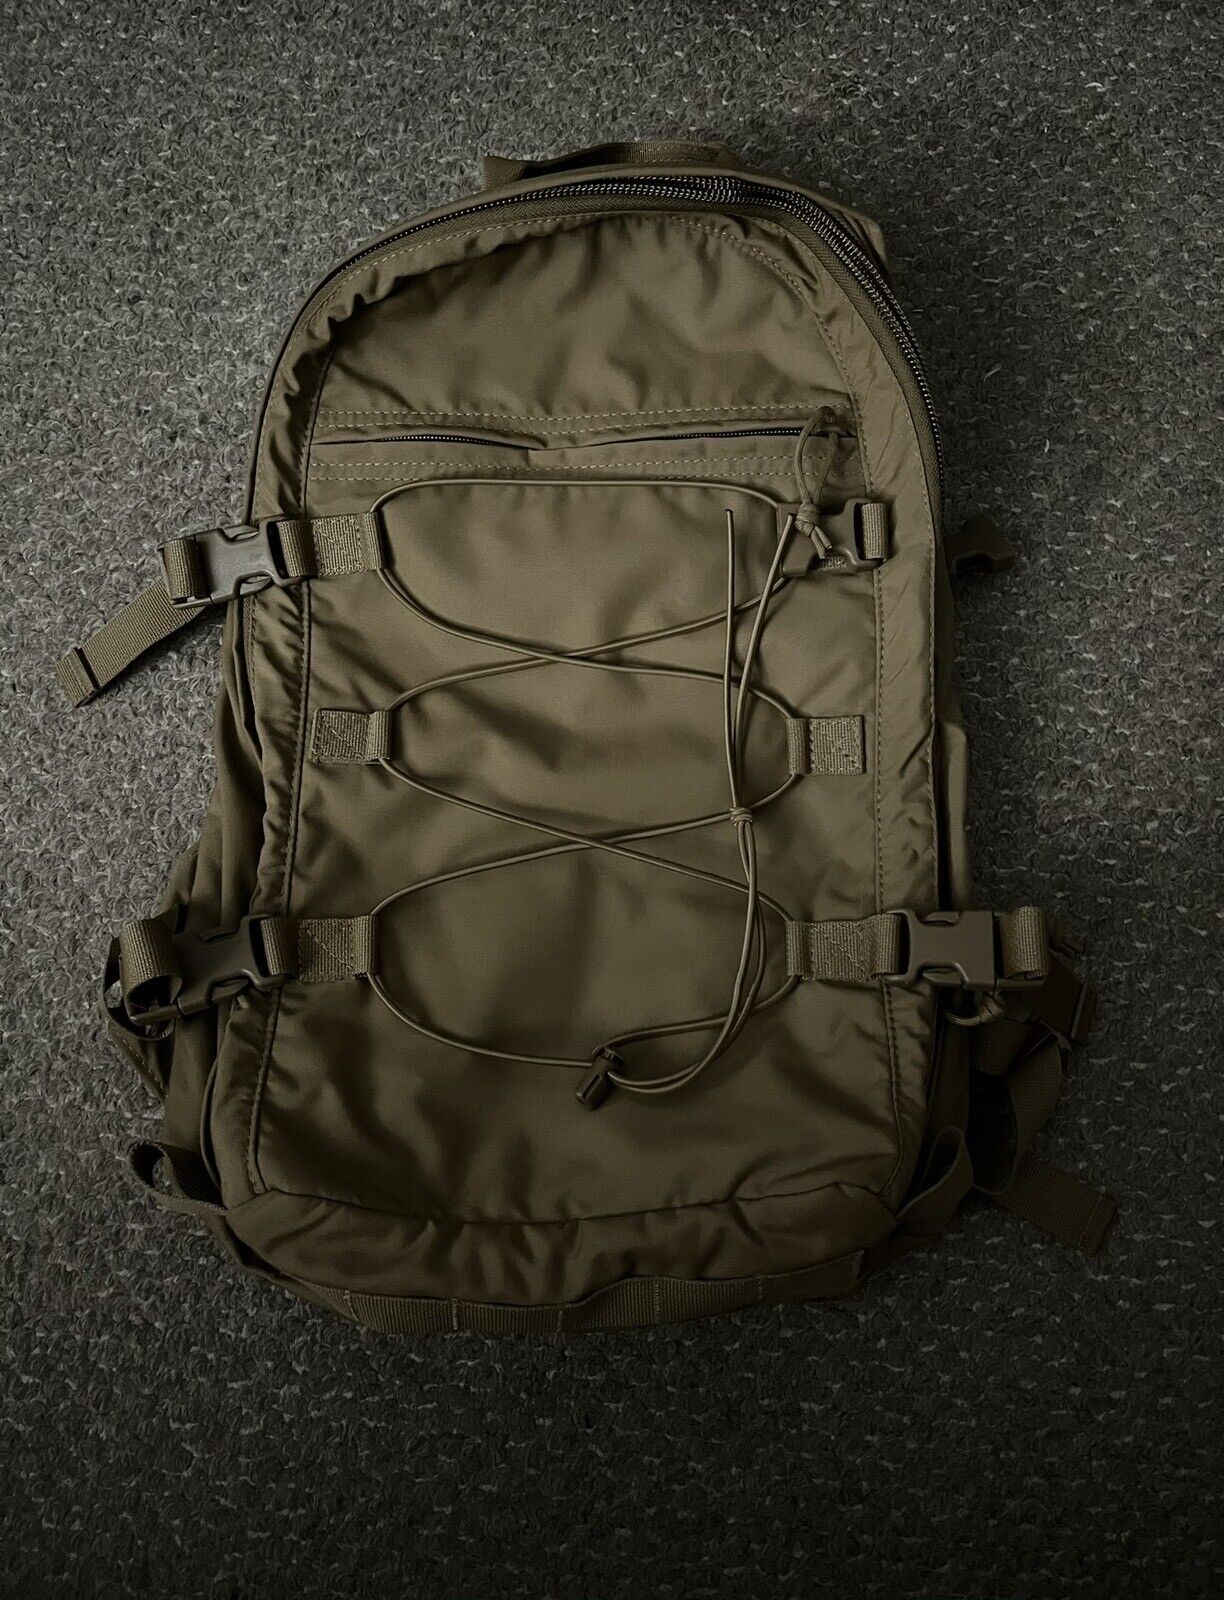 New ATS Tactical Cobra 2.6 Military Pack Coyote Brown